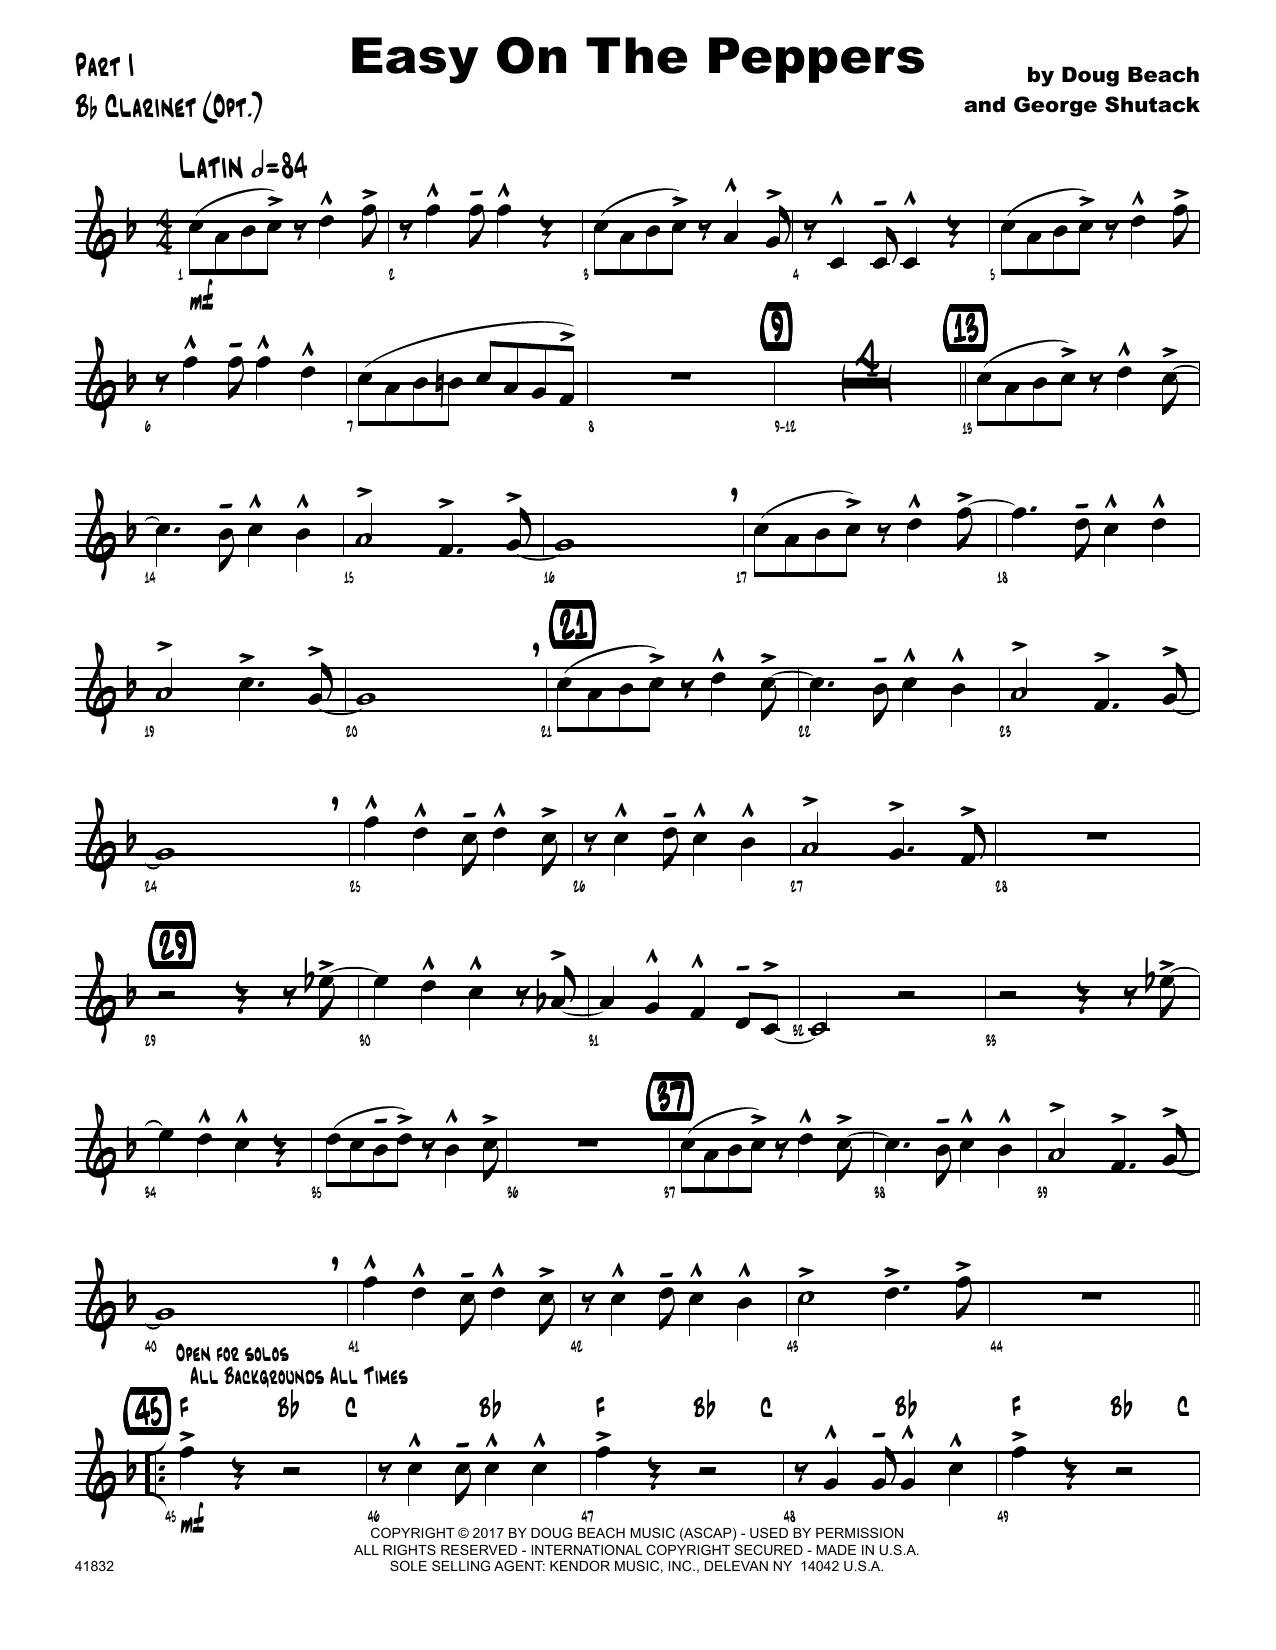 Download Doug Beach & George Shutack Easy On The Peppers - Bb Clarinet Sheet Music